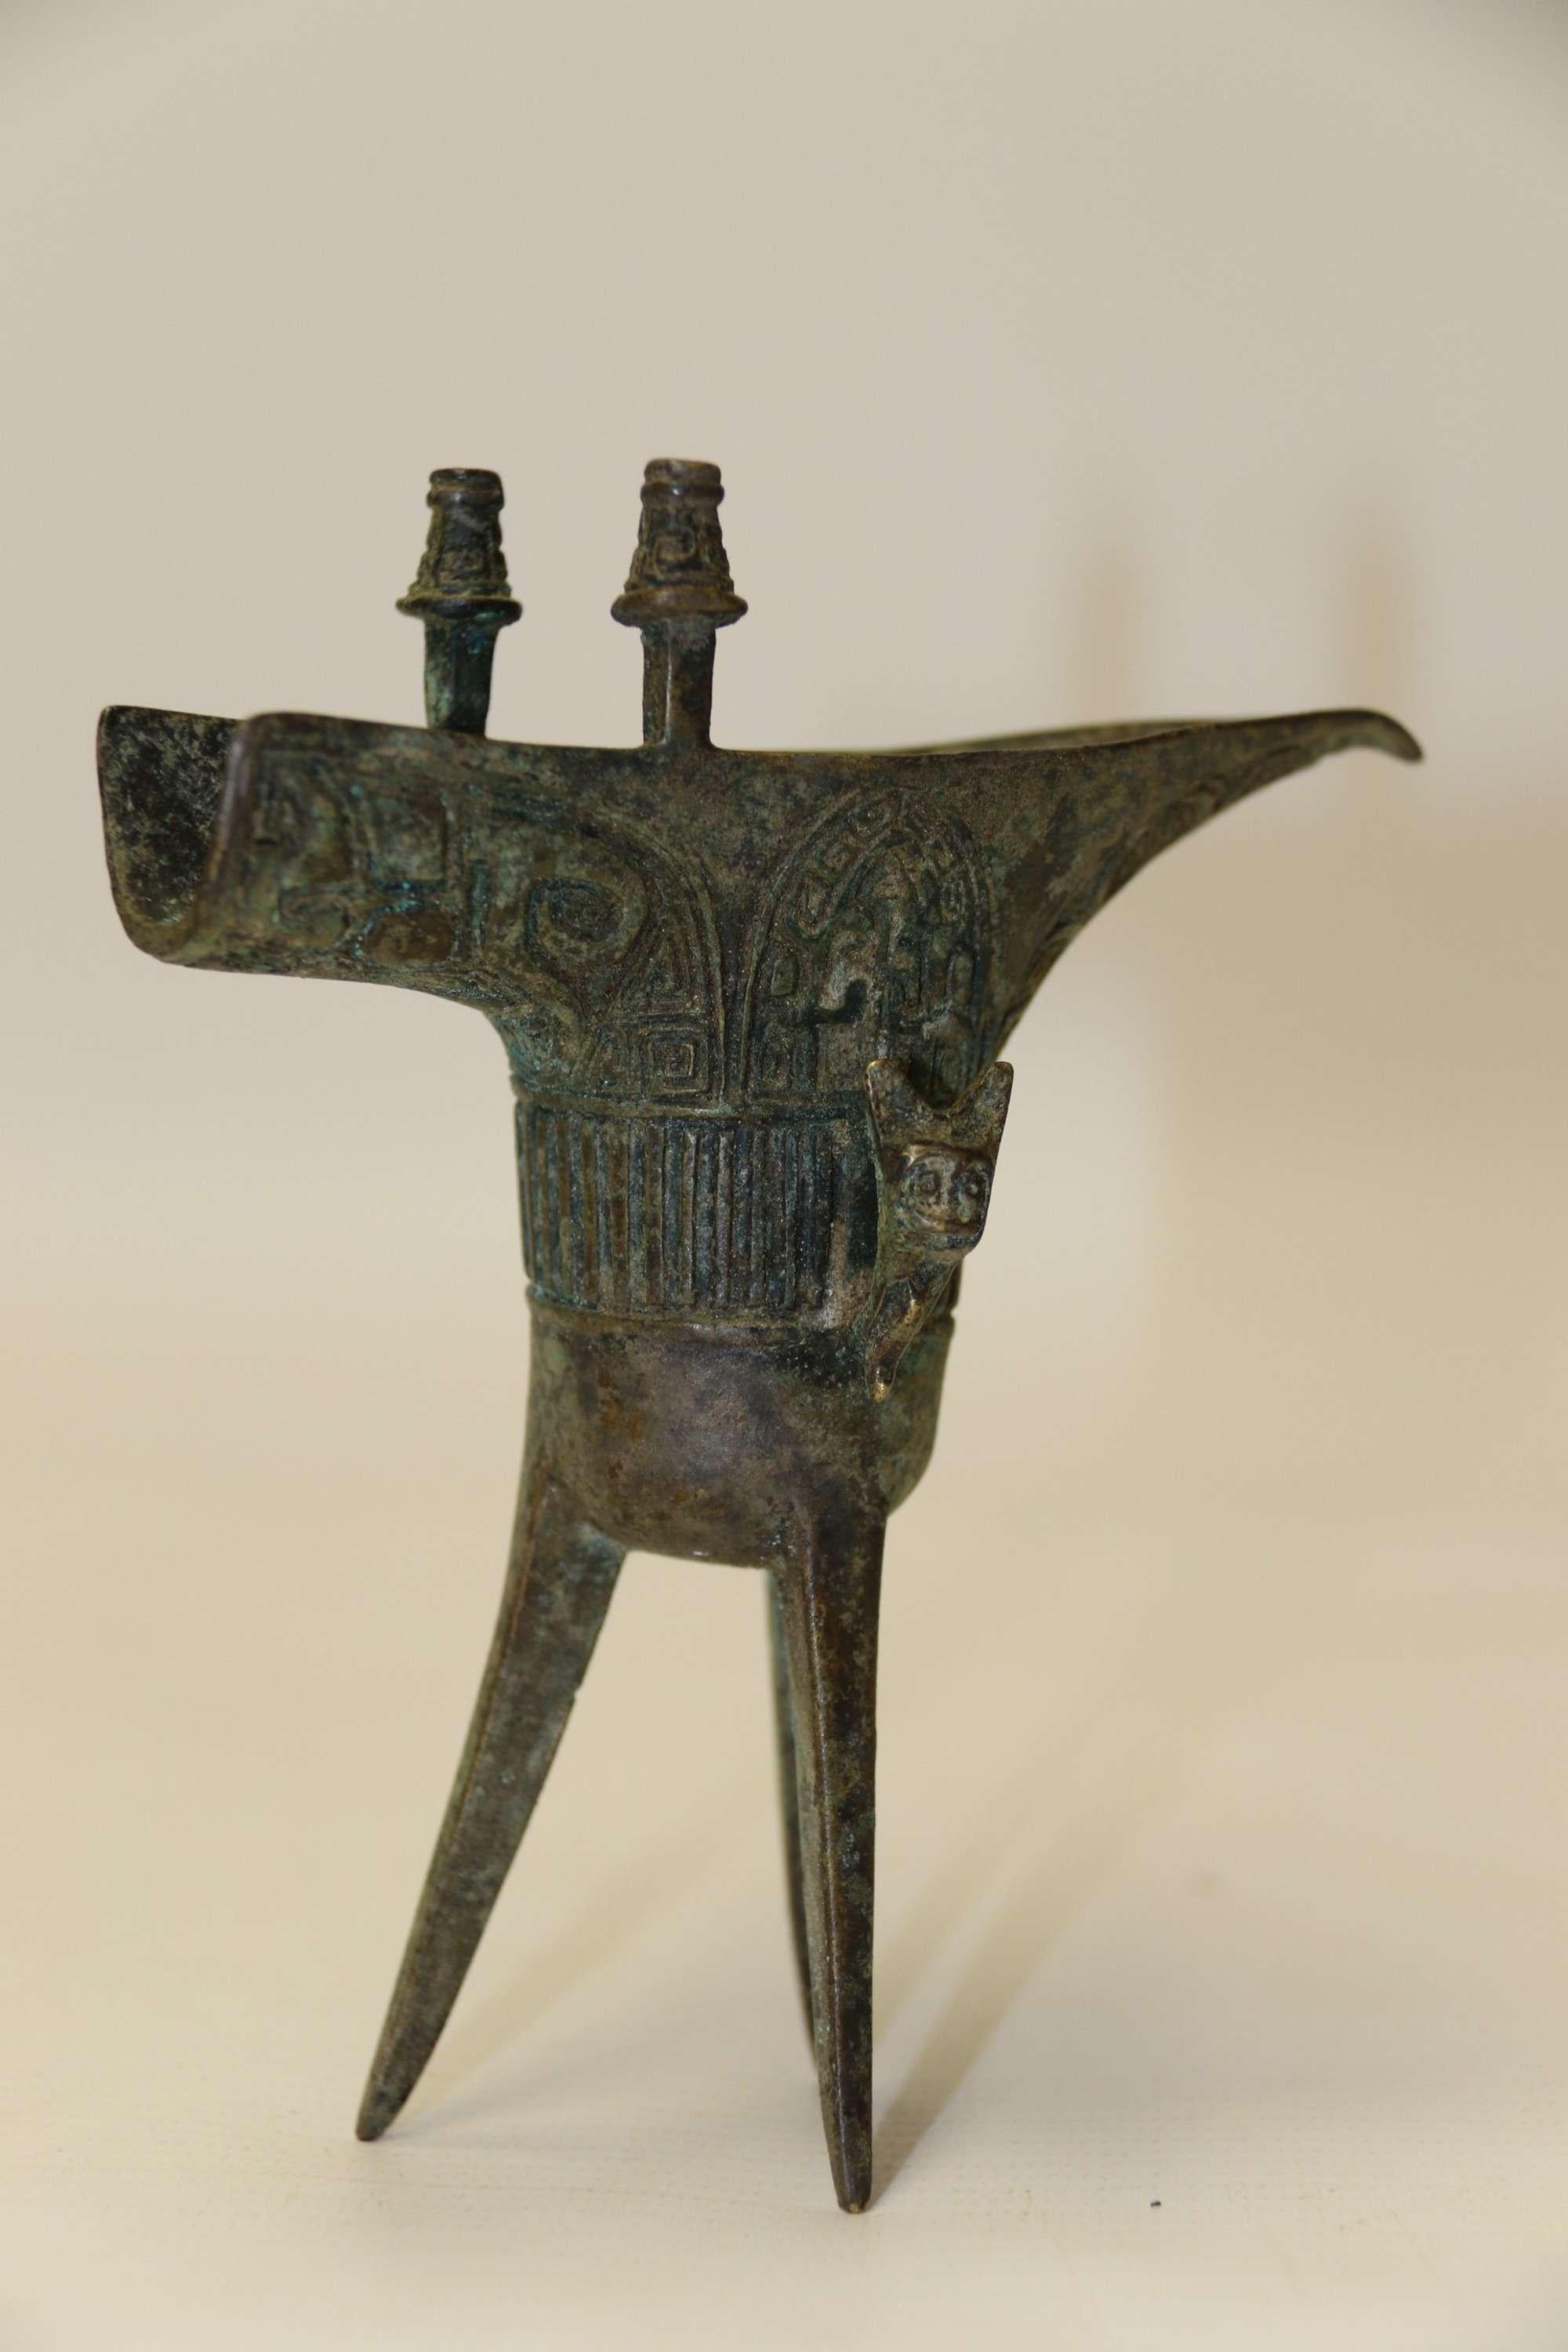 A Fine Chinese Bronze Archaistic Jue Ritual Vessel

This interesting Chinese Archaistic Jue is finely cast in bronze and it represents an ancient pouring vessel used in rituals and ceremonies. This small example is beautifully decorated with a cast